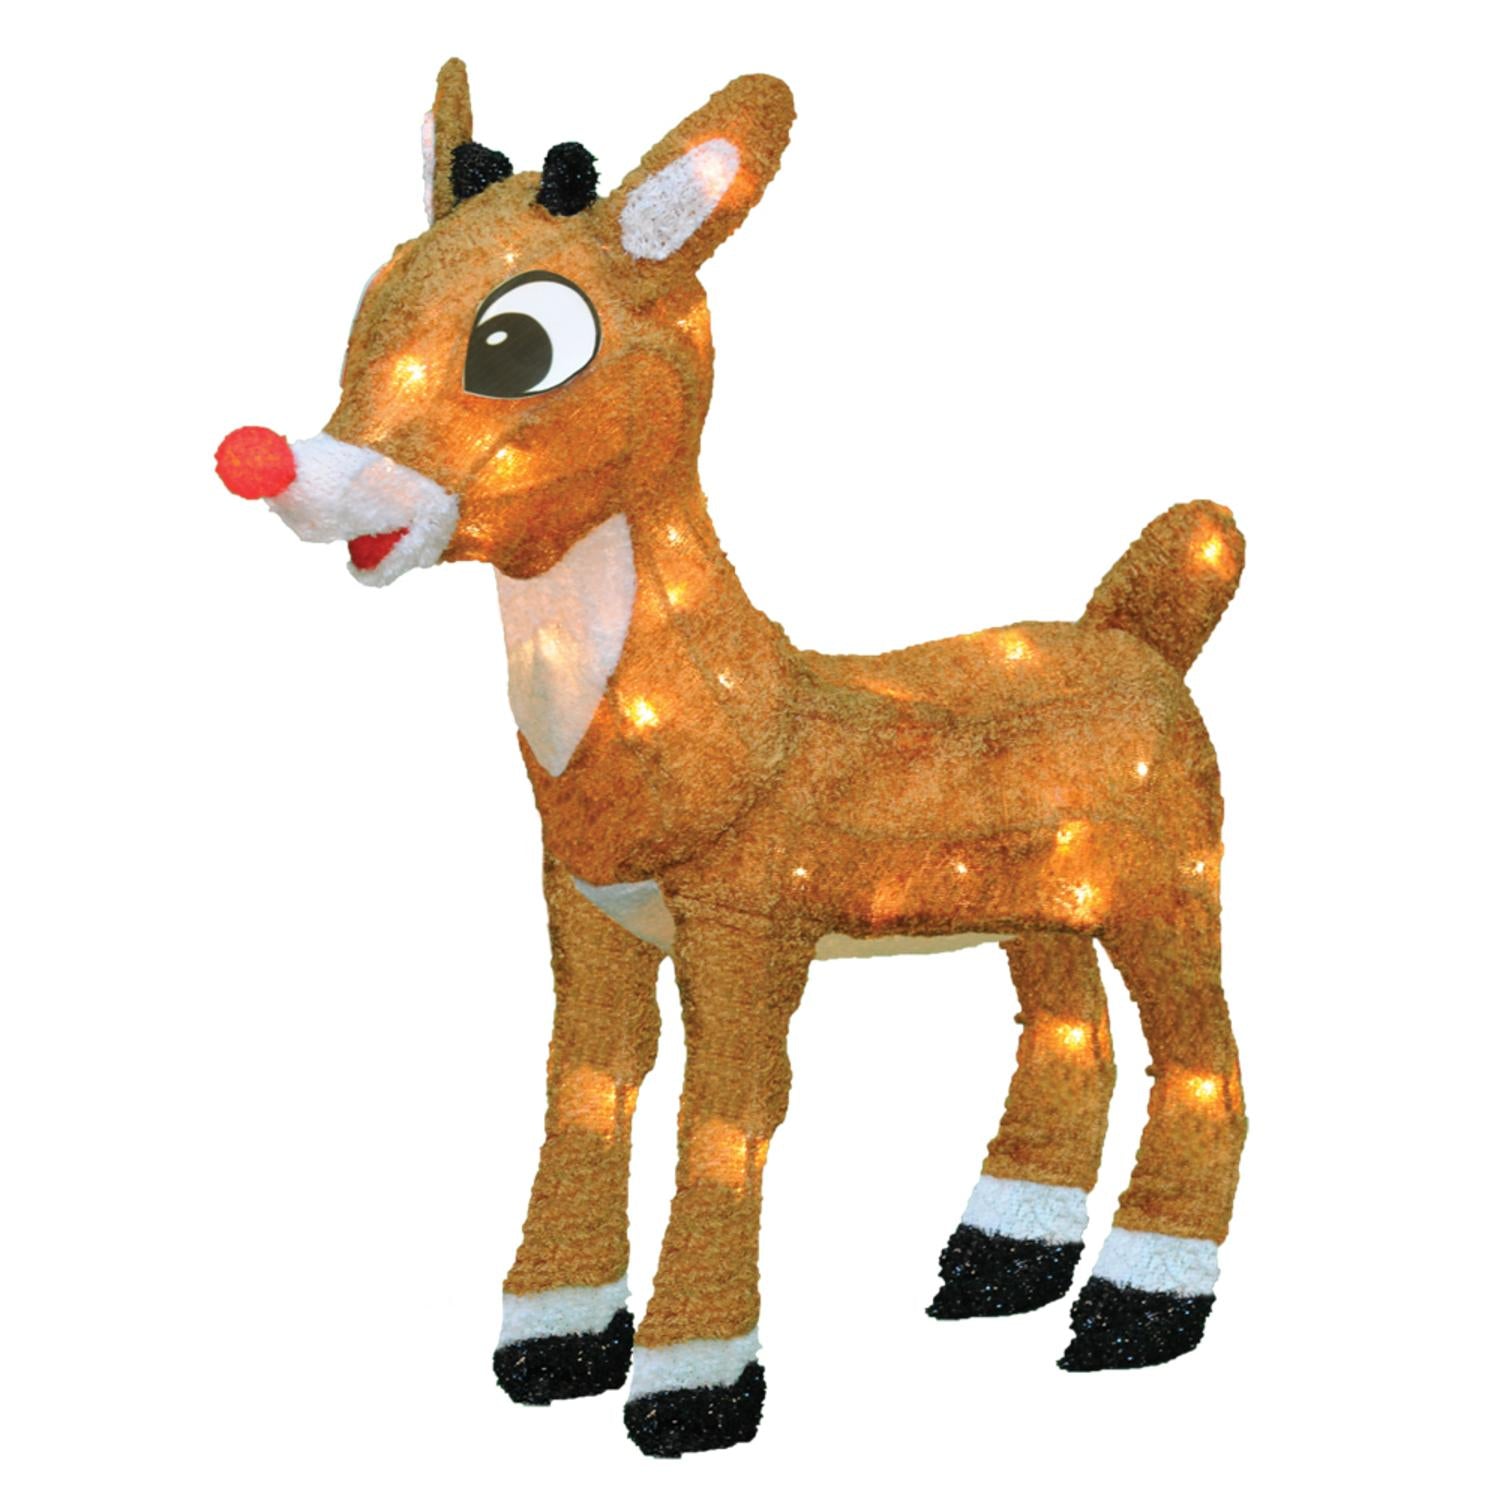 18" Pre-Lit Rudolph the Red-Nosed Reindeer Outdoor Decoration - Clear Lights